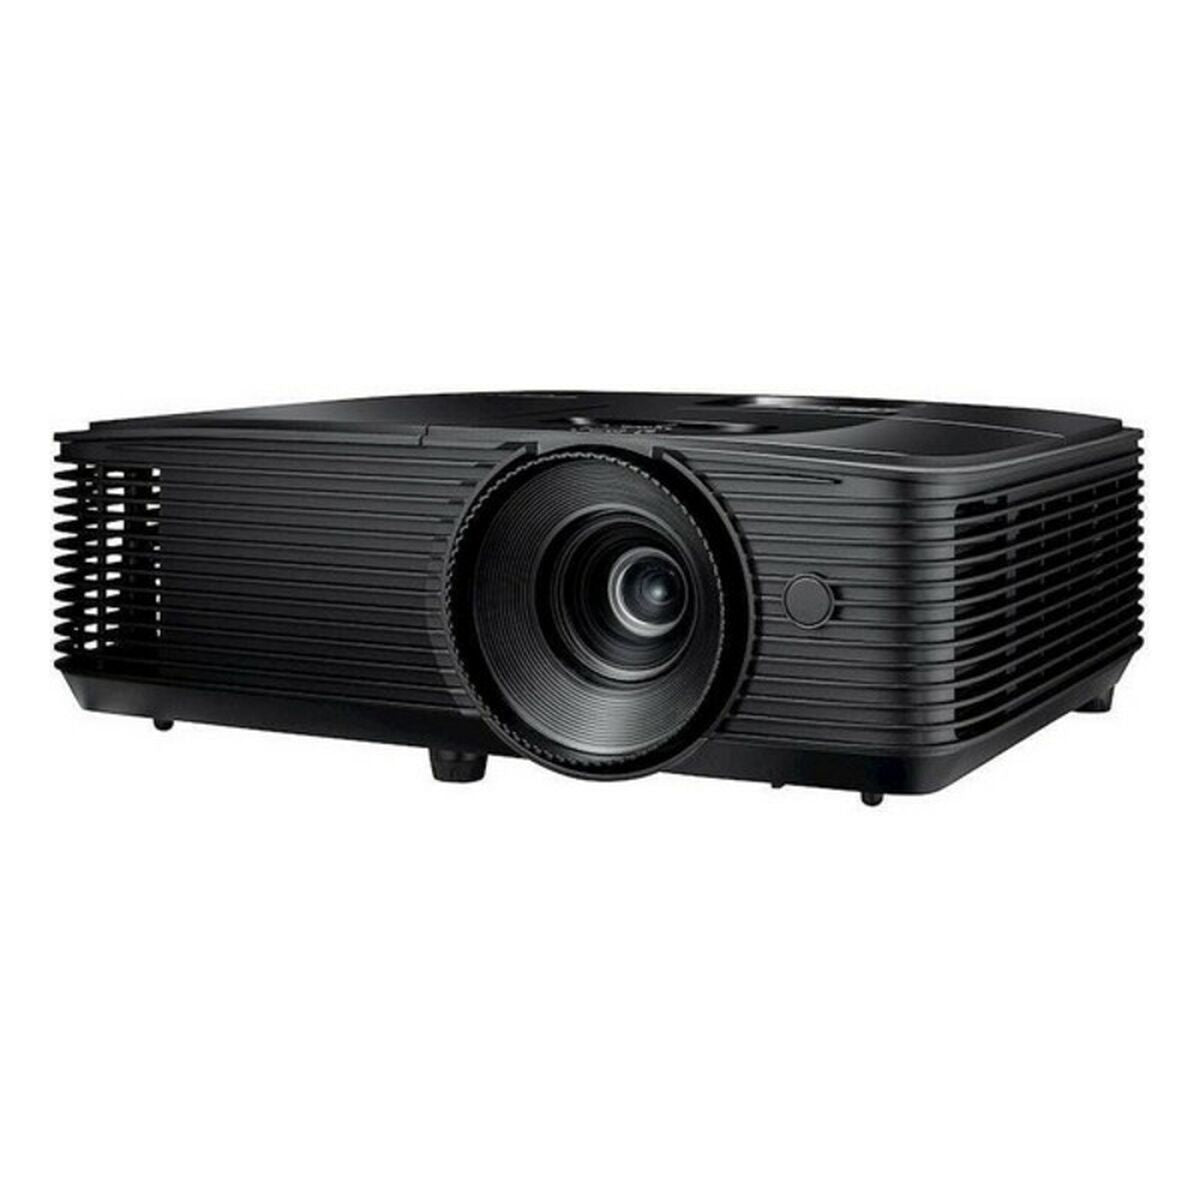 Projector Optoma E1P0A3PBE1Z1 Black 3400 Lm, Optoma, Electronics, Photography and video cameras, projector-optoma-e1p0a3pbe1z1-black-3400-lm, Brand_Optoma, category-reference-2609, category-reference-2642, category-reference-2947, category-reference-t-19653, category-reference-t-8122, computers / peripherals, Condition_NEW, entertainment, fotografía, office, Price_700 - 800, RiotNook